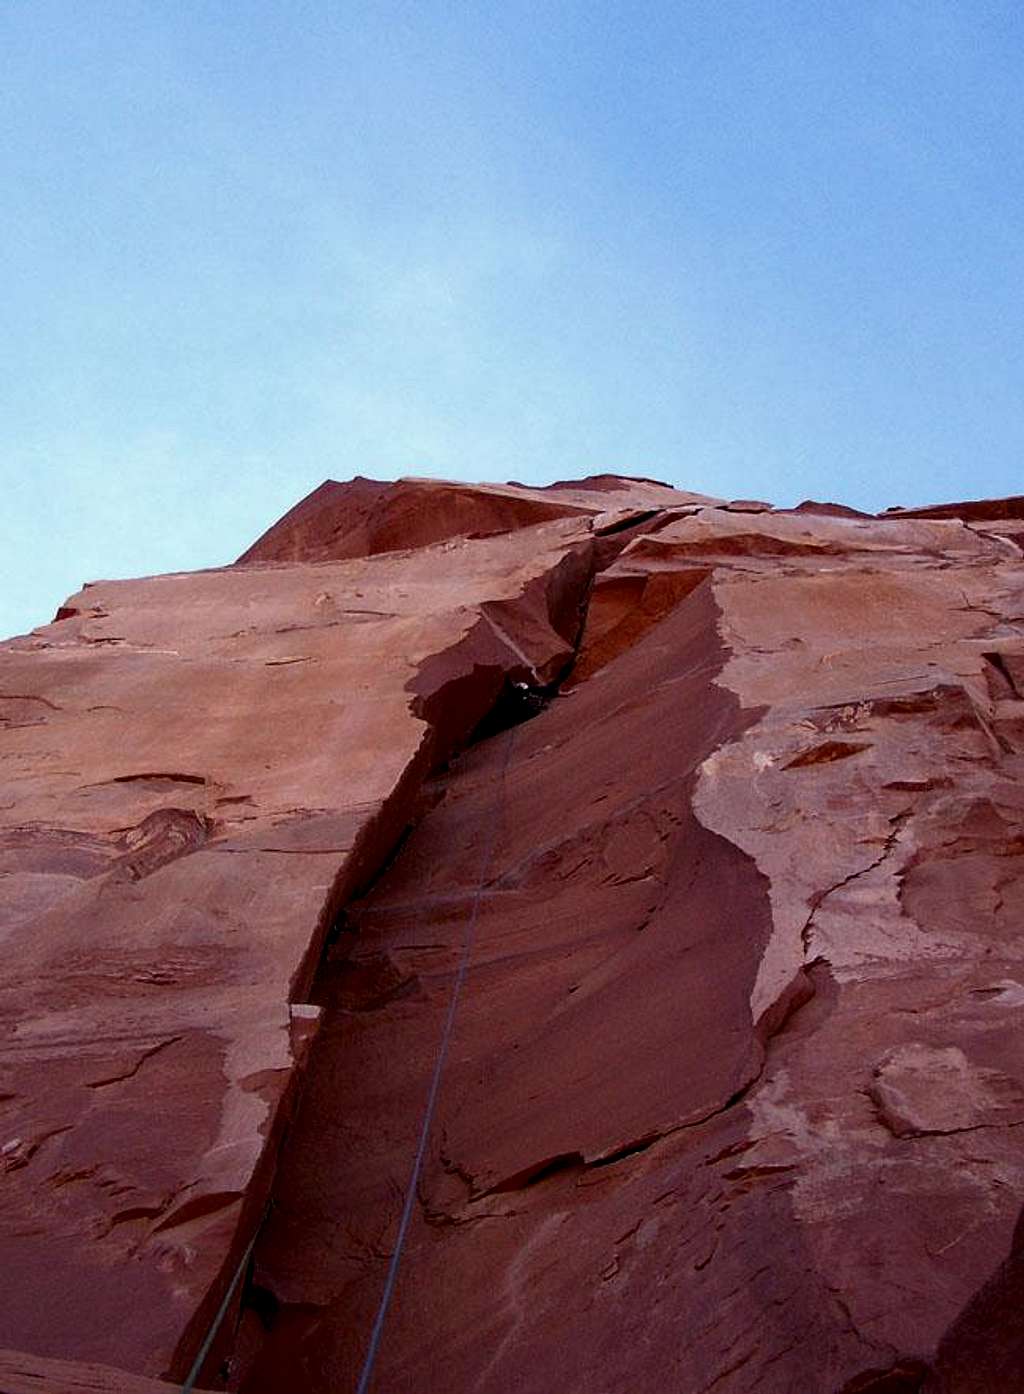 North Face, 5.11a